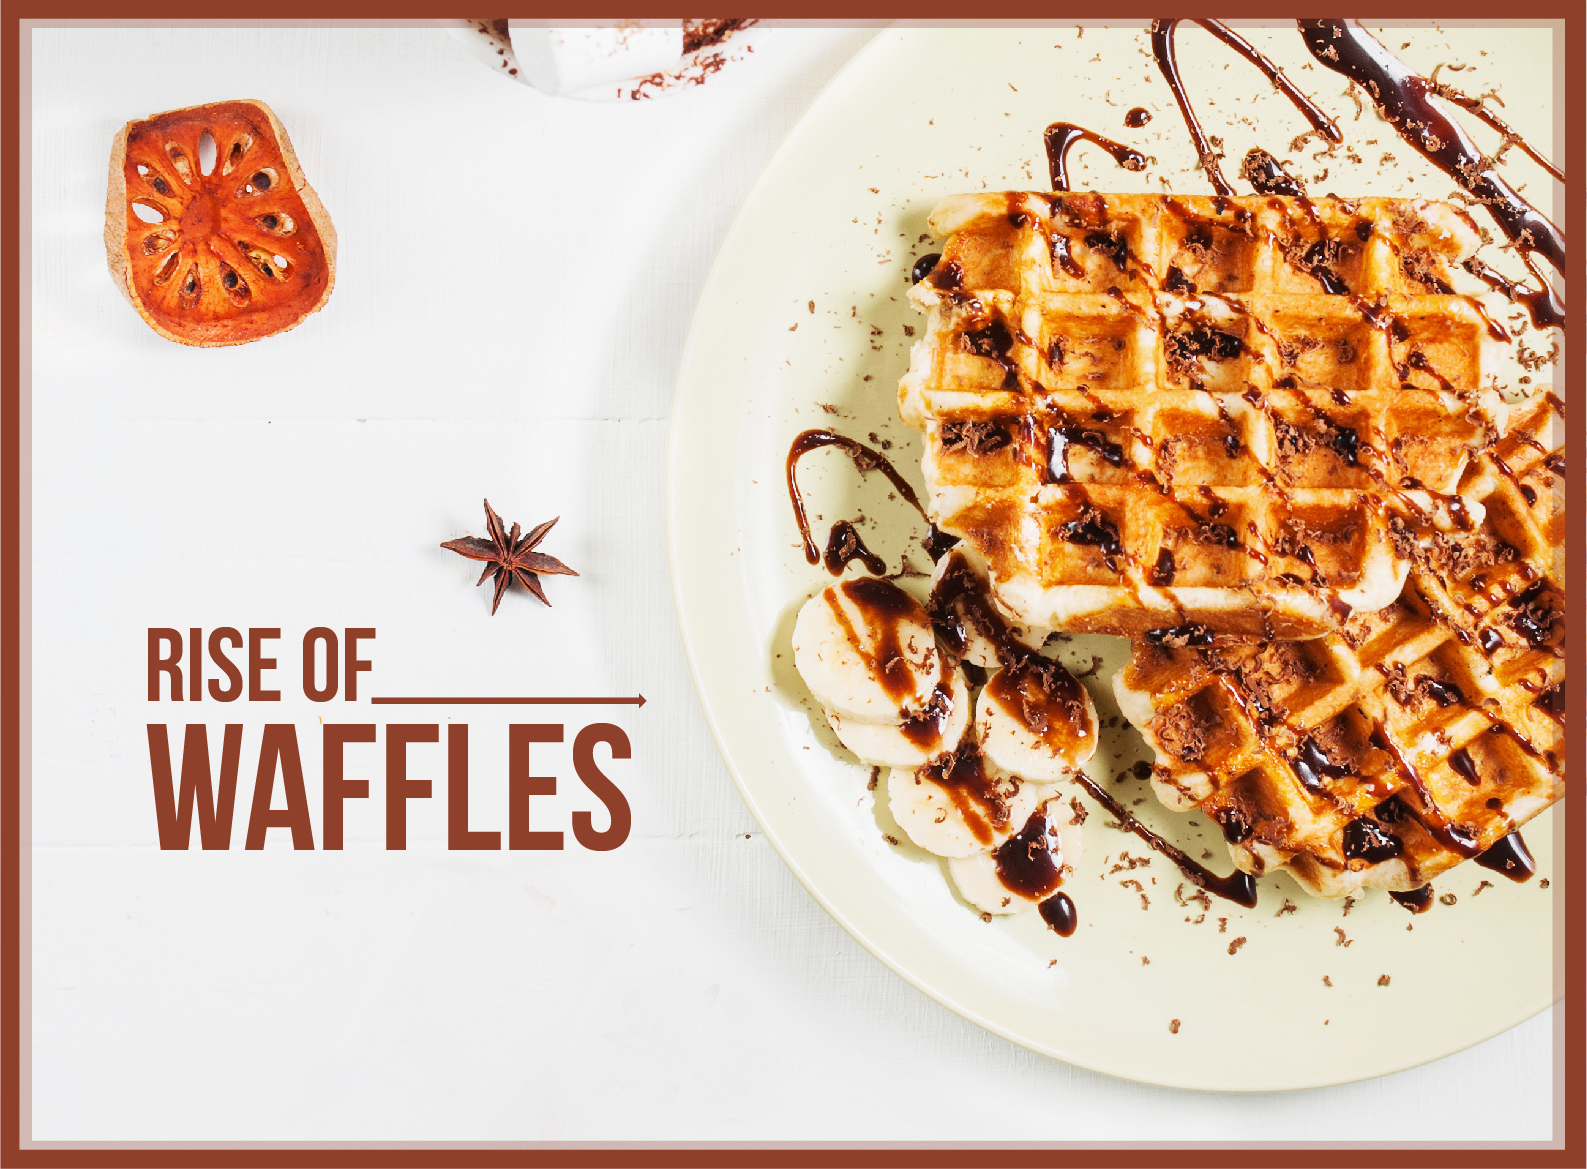 "RISE OF WAFFLES" - The Growing Popularity Of Waffles